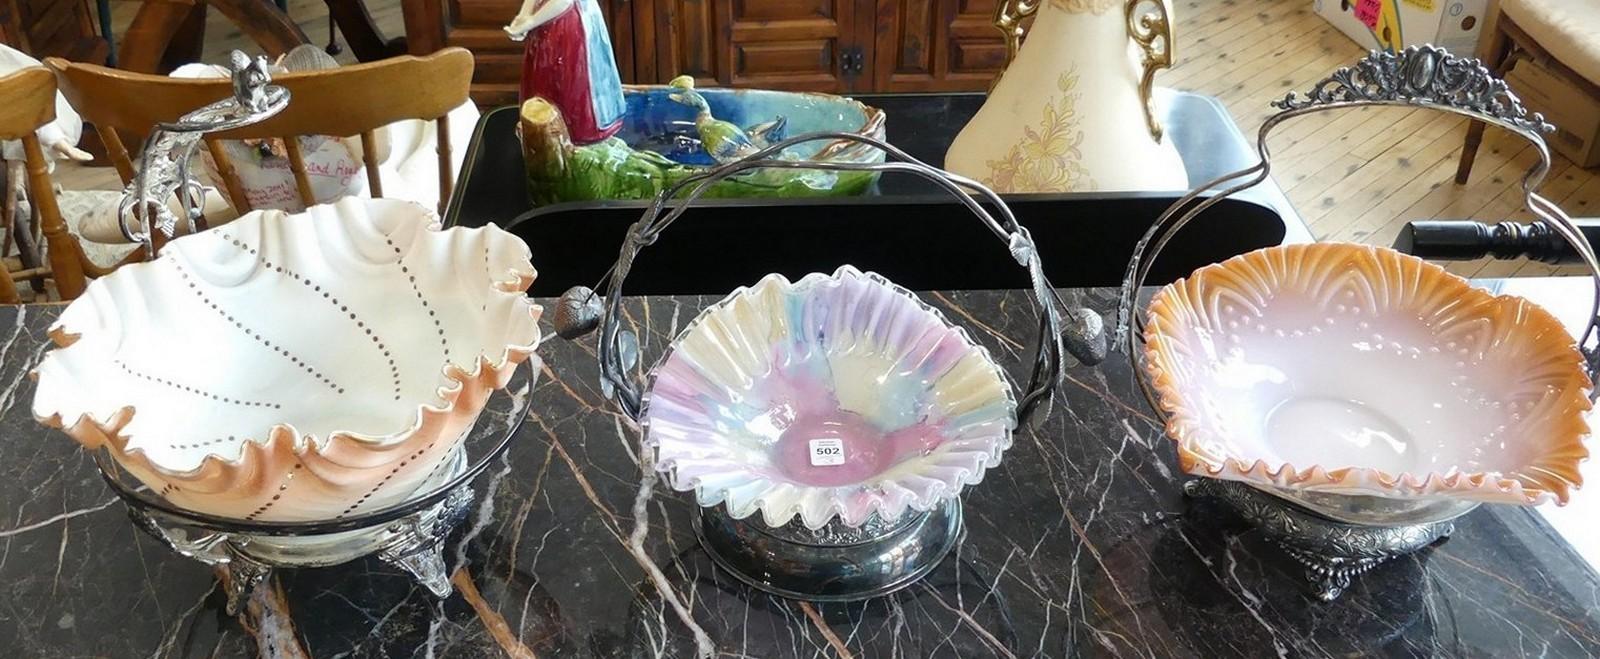 TWO BRIDE'S BASKETS AND BRIDE'S BOWL